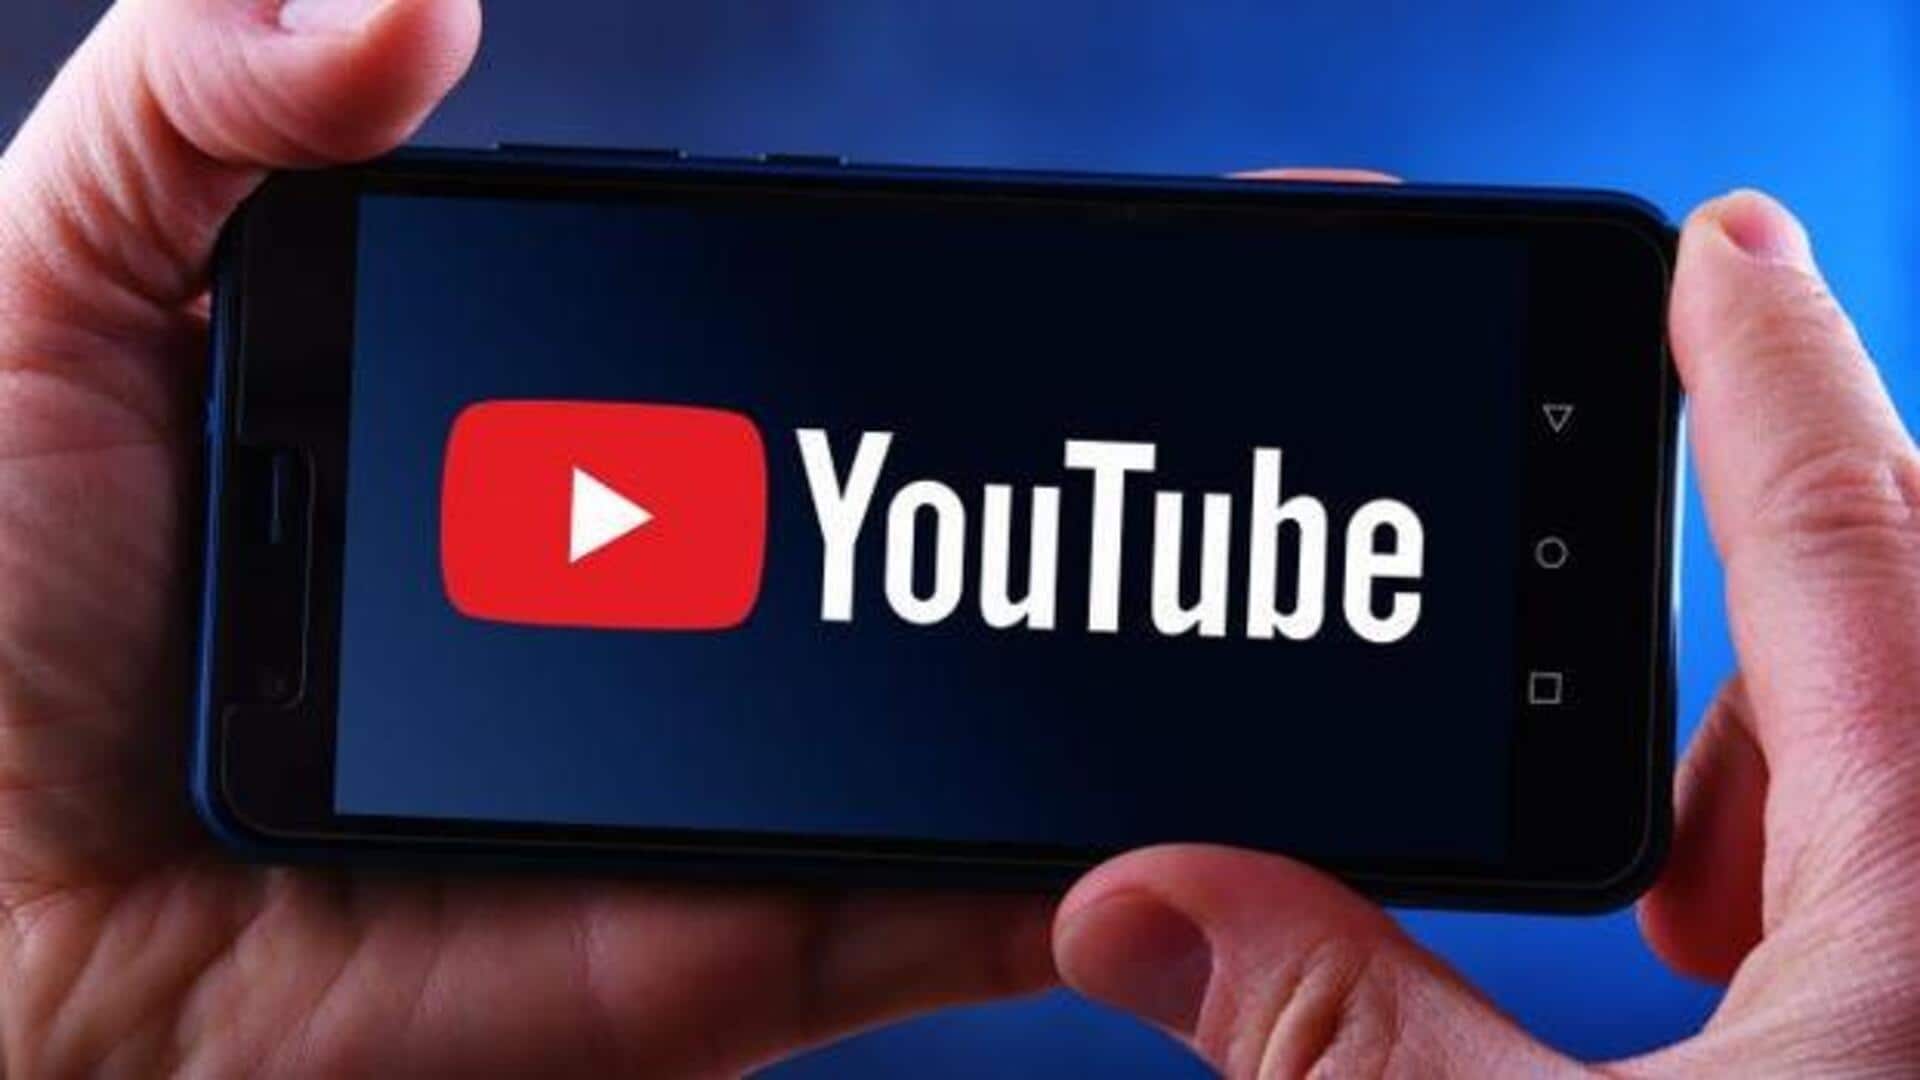 YouTube tightens age restrictions on gun-related content following criticism